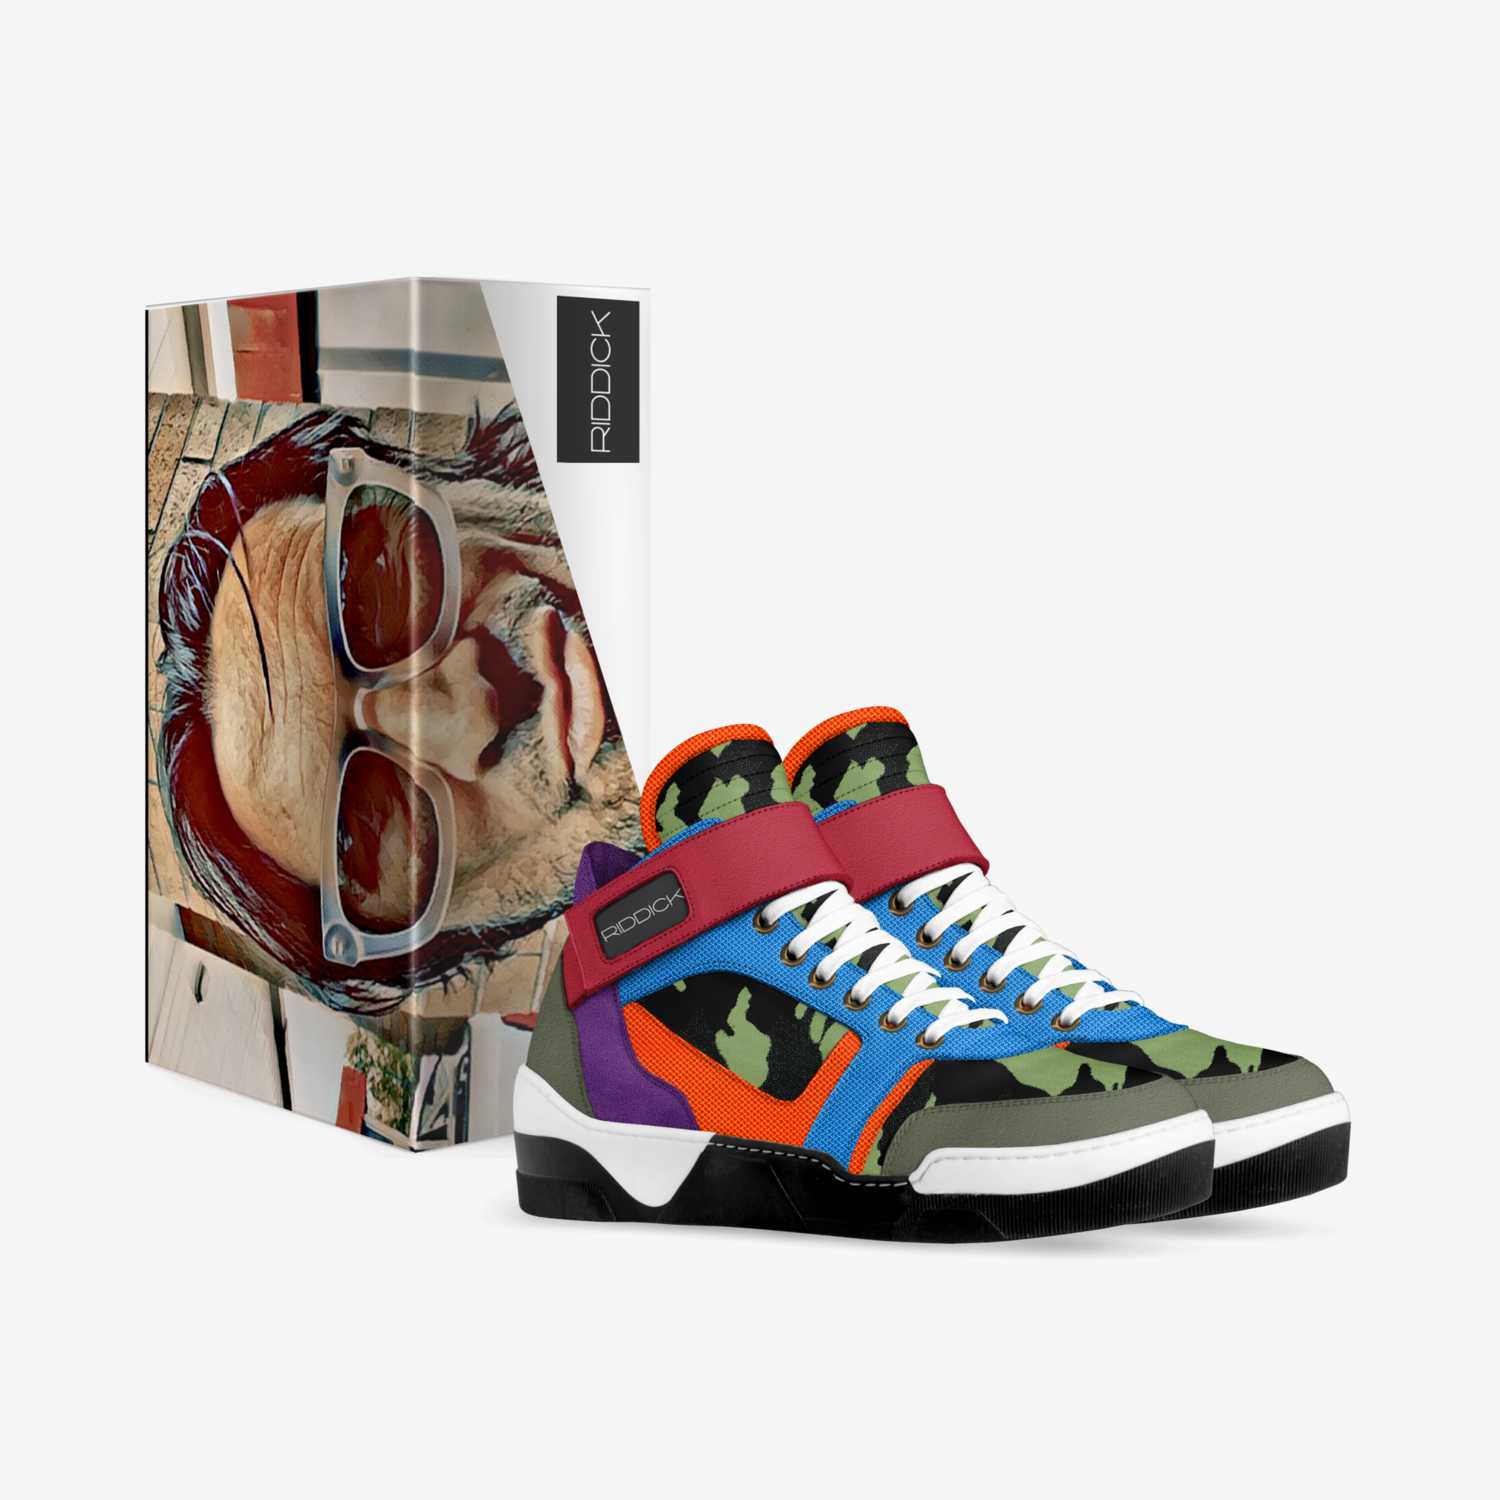 Revelation custom made in Italy shoes by Haden Riddick | Box view